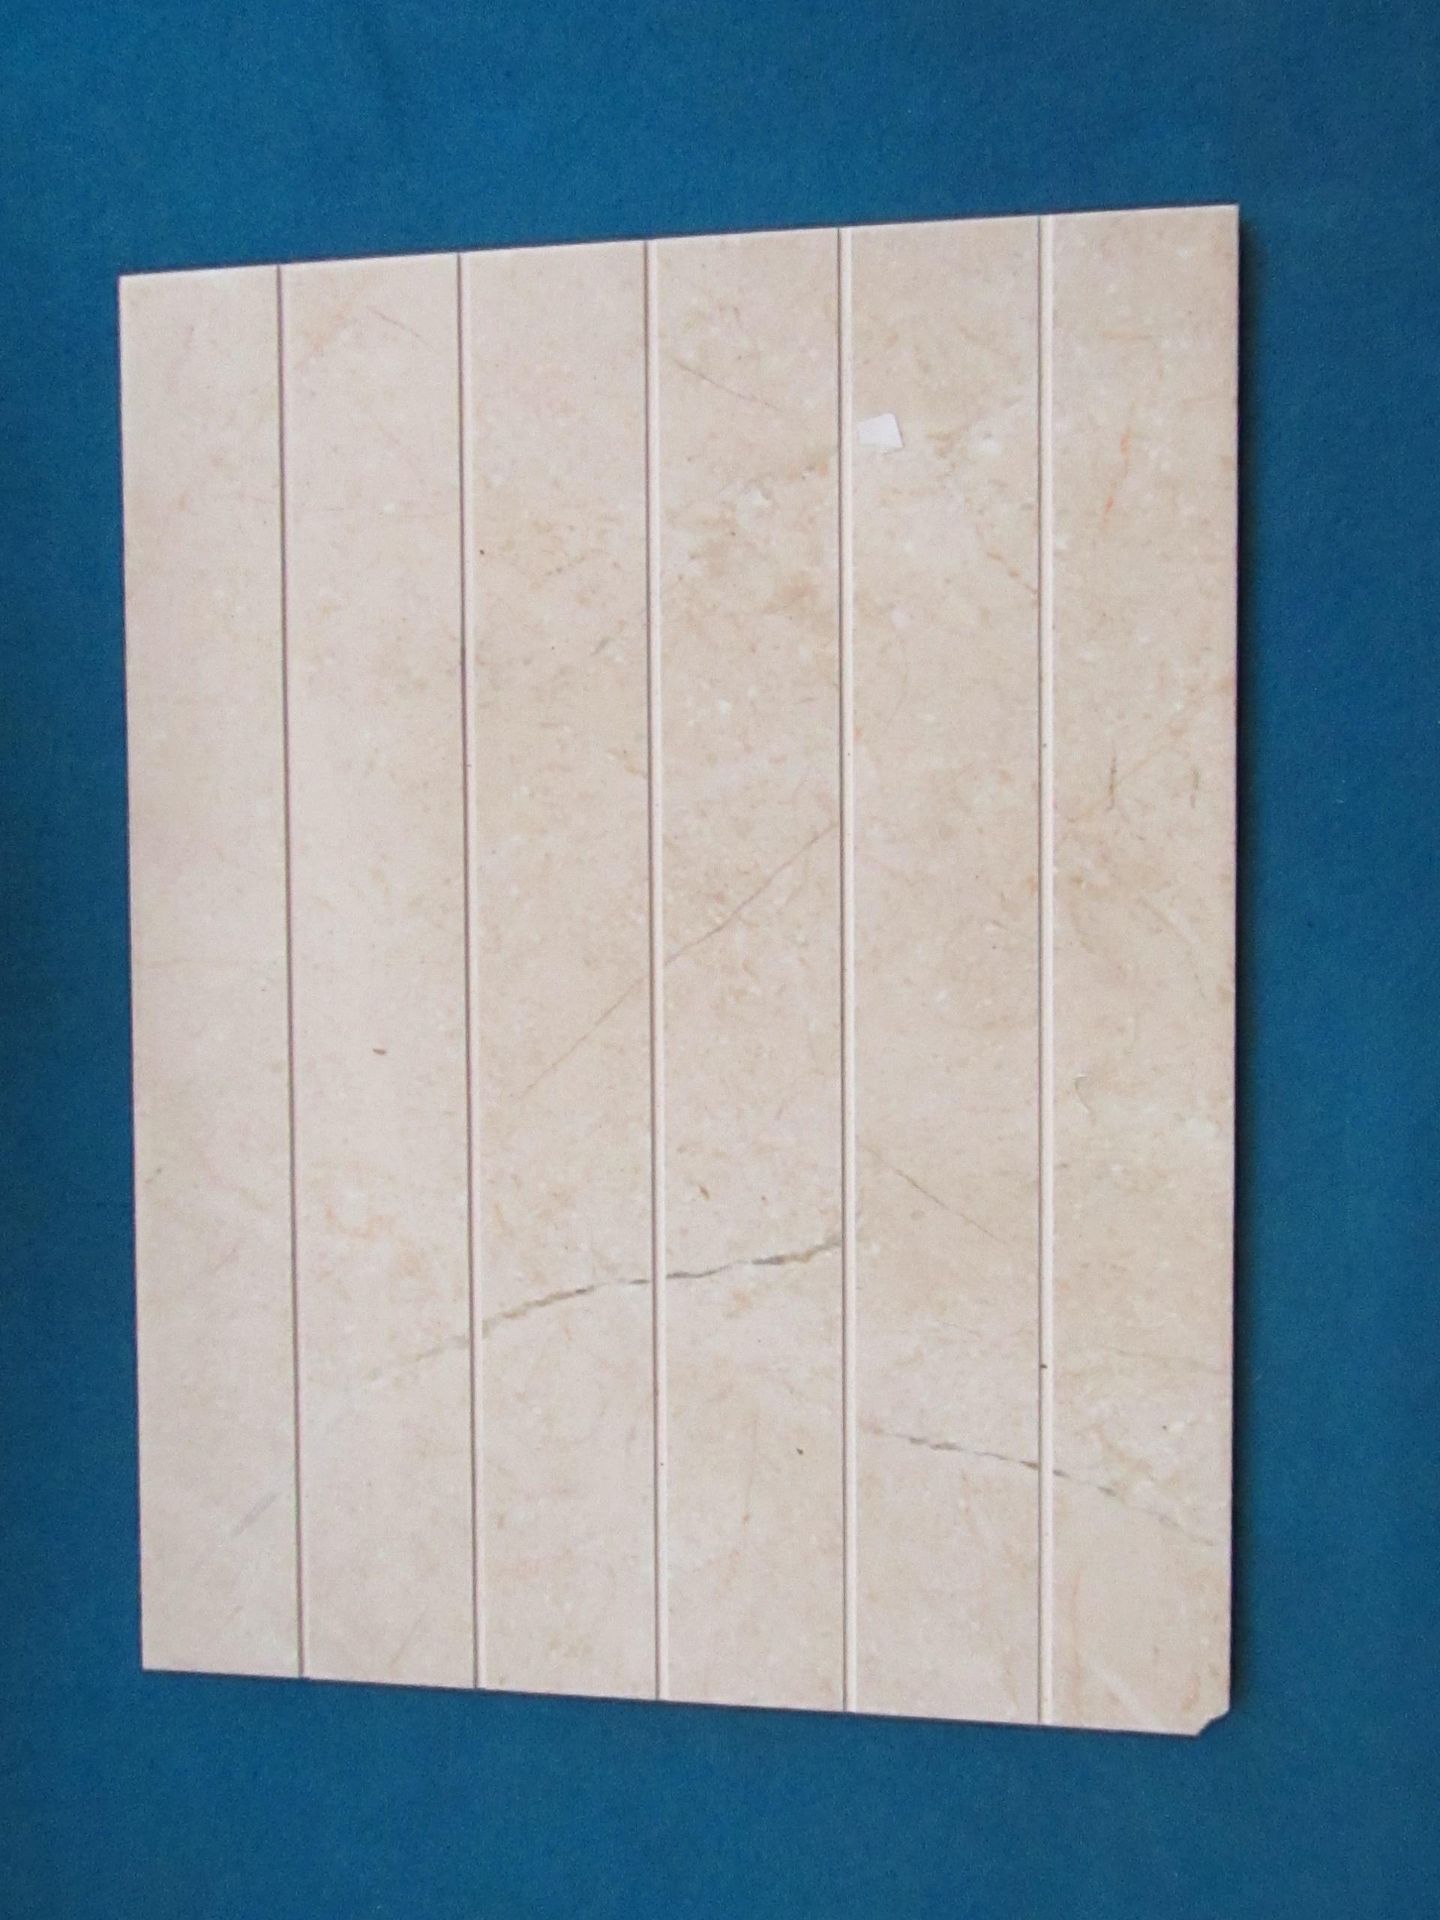 12x Packs of 10 Wickes 360x275 Crema Marfil Satin Scored wall tiles, new. Each pack is RRP £16.99